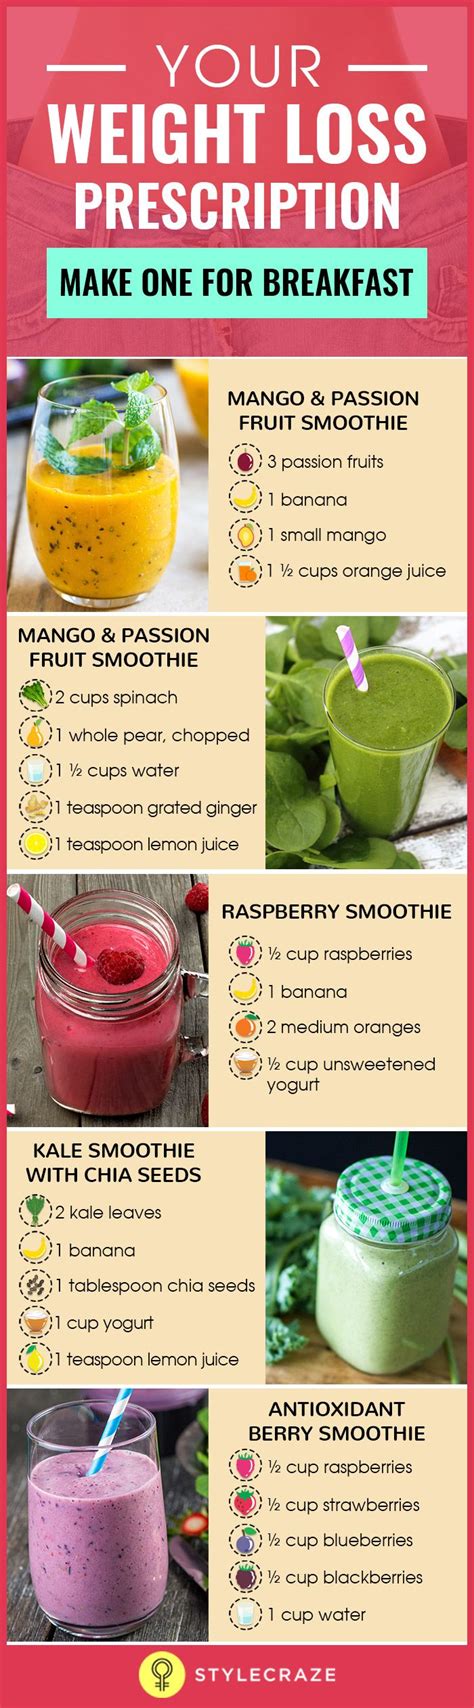 Healthy Shakes And Smoothies To Lose Weight Smoothie Recipes Protein Shakes For Weight Loss20